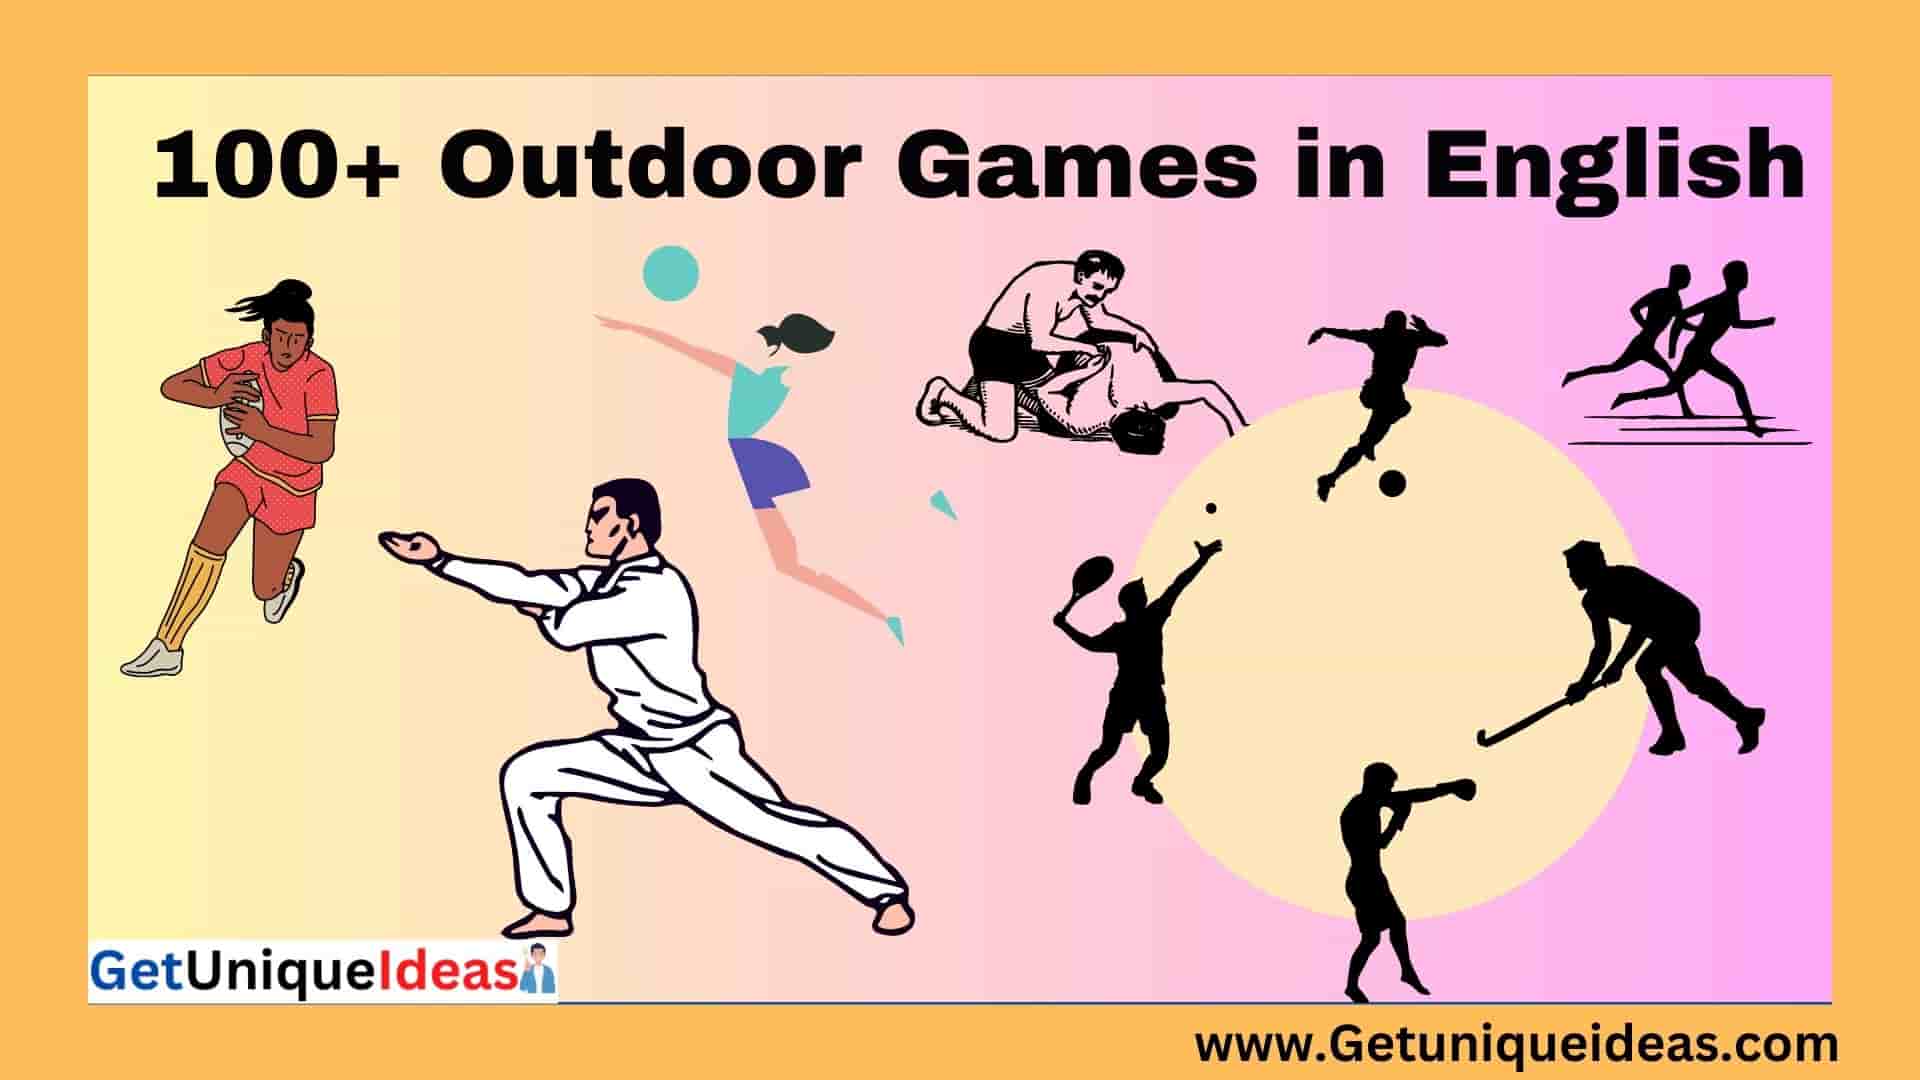 100+ outdoor games in english